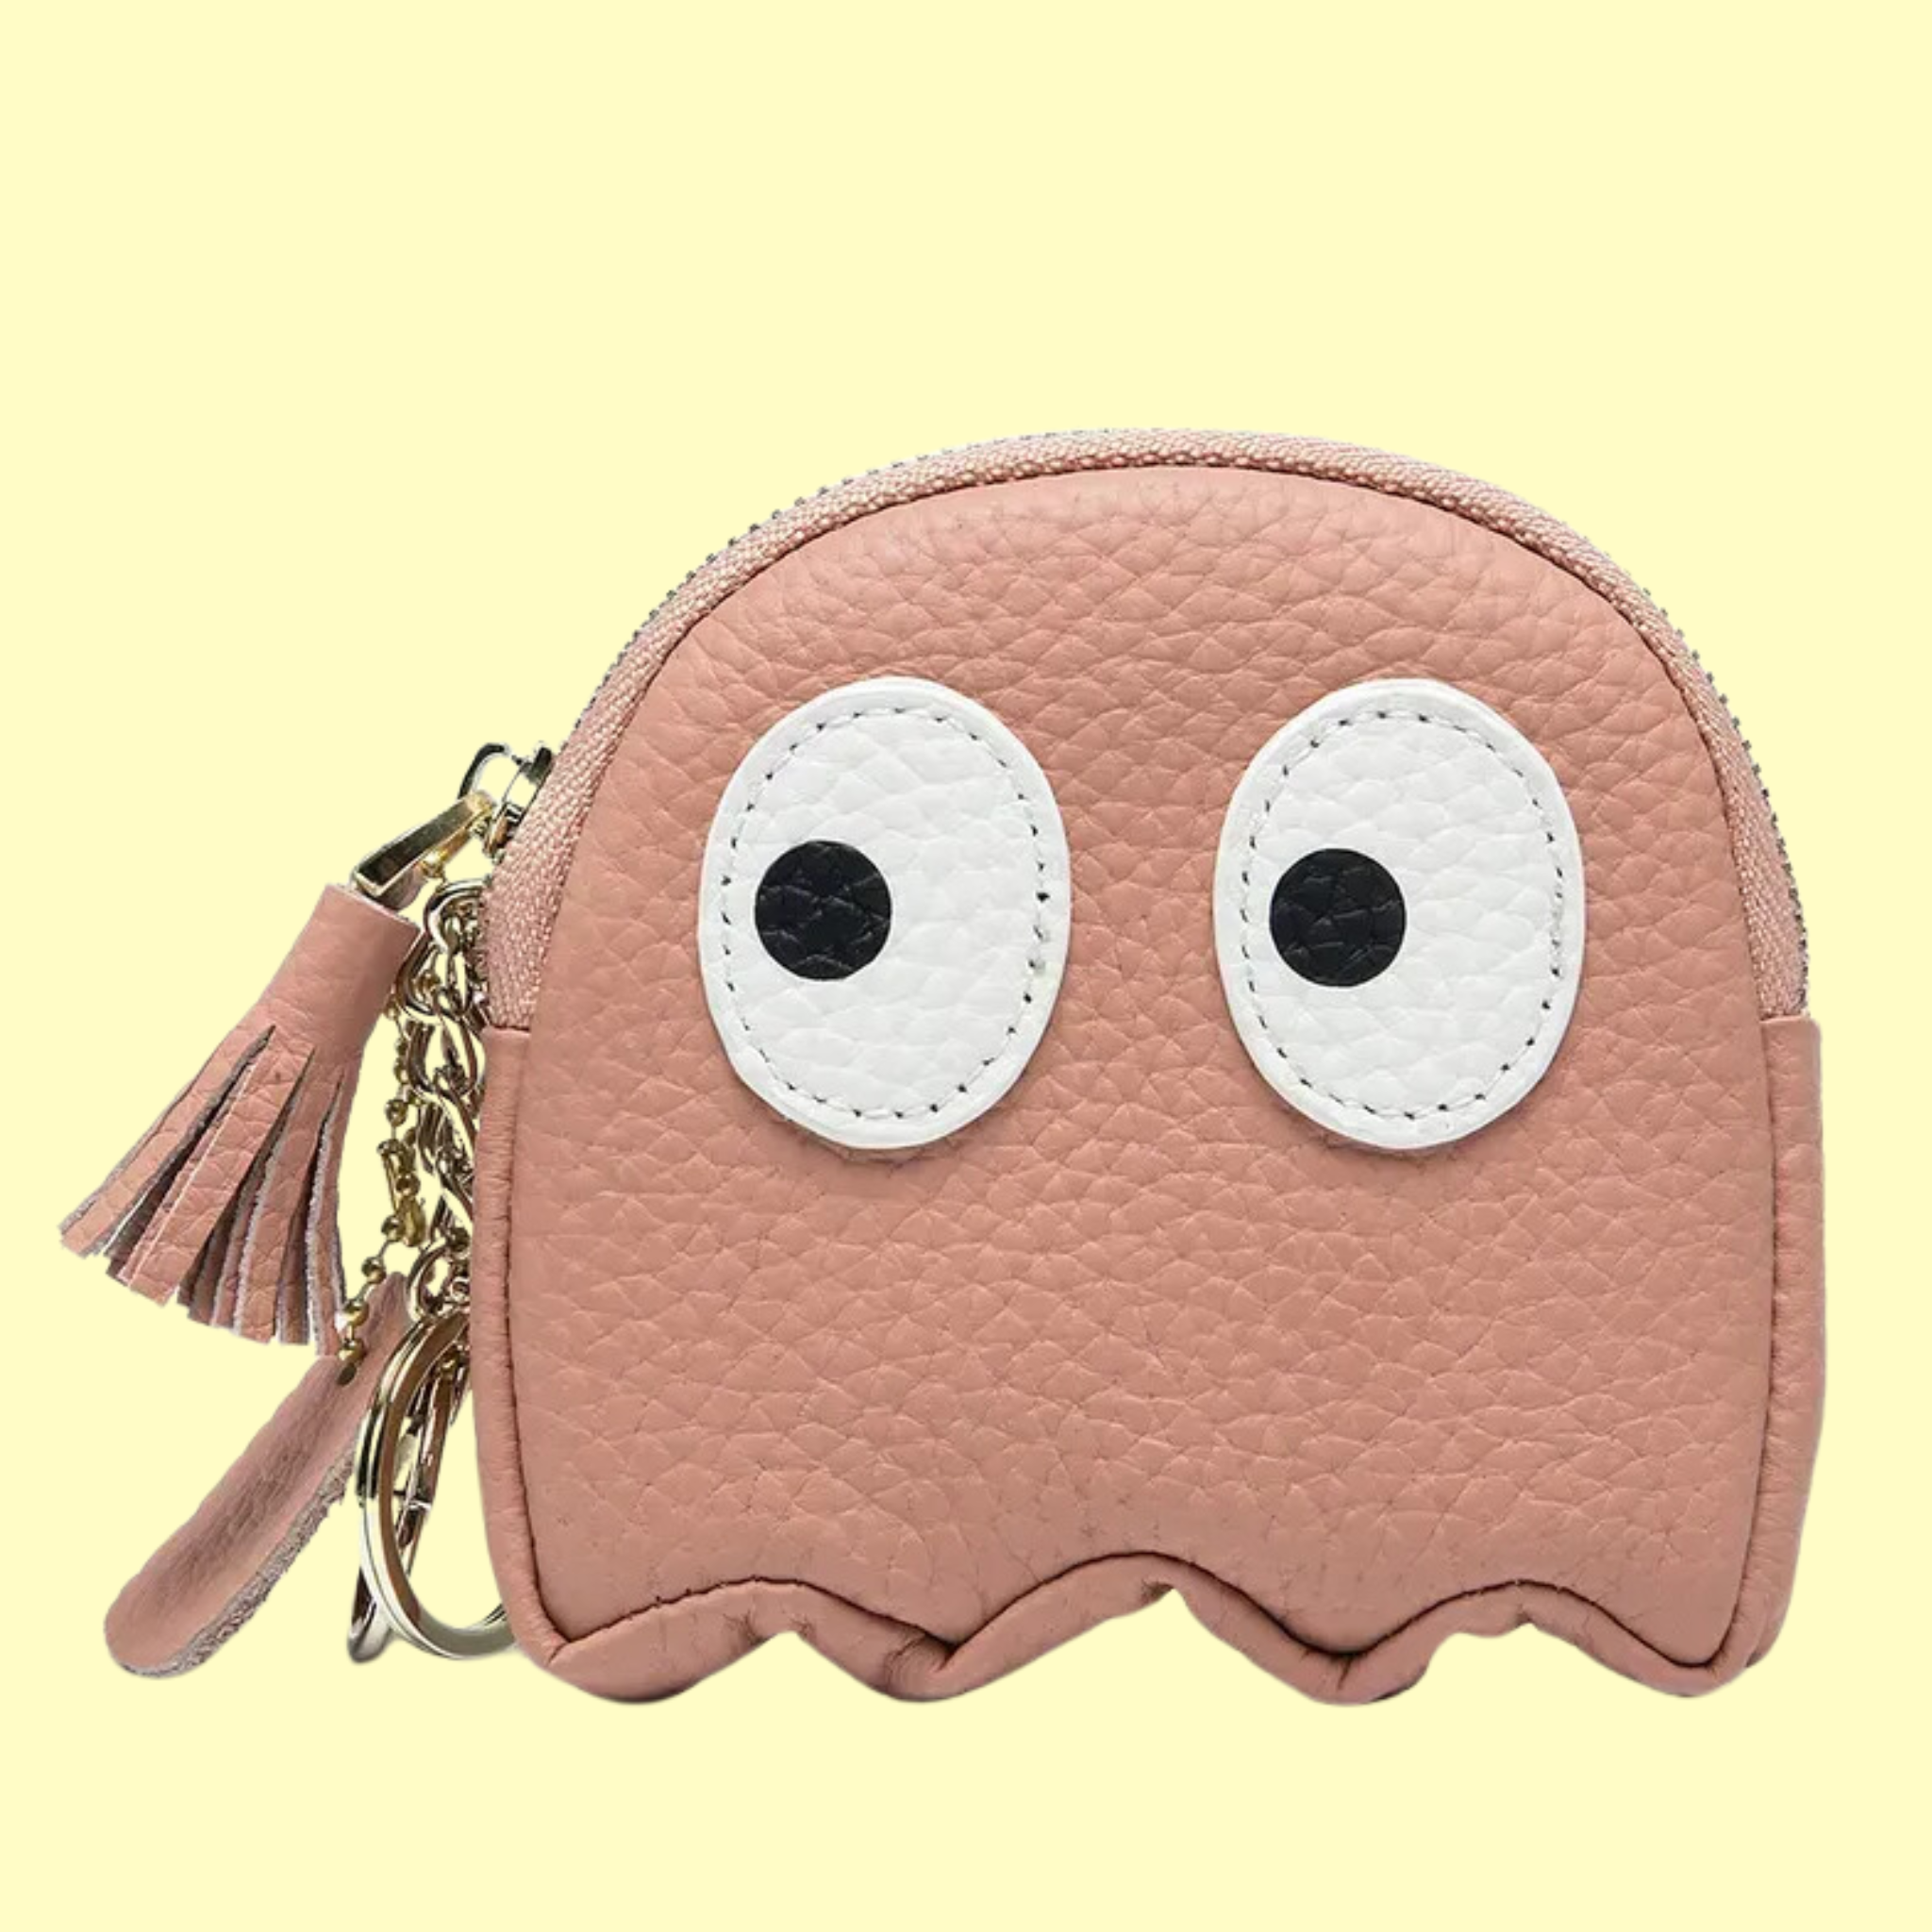 Blinky! - Real Leather Purse Coral Pink